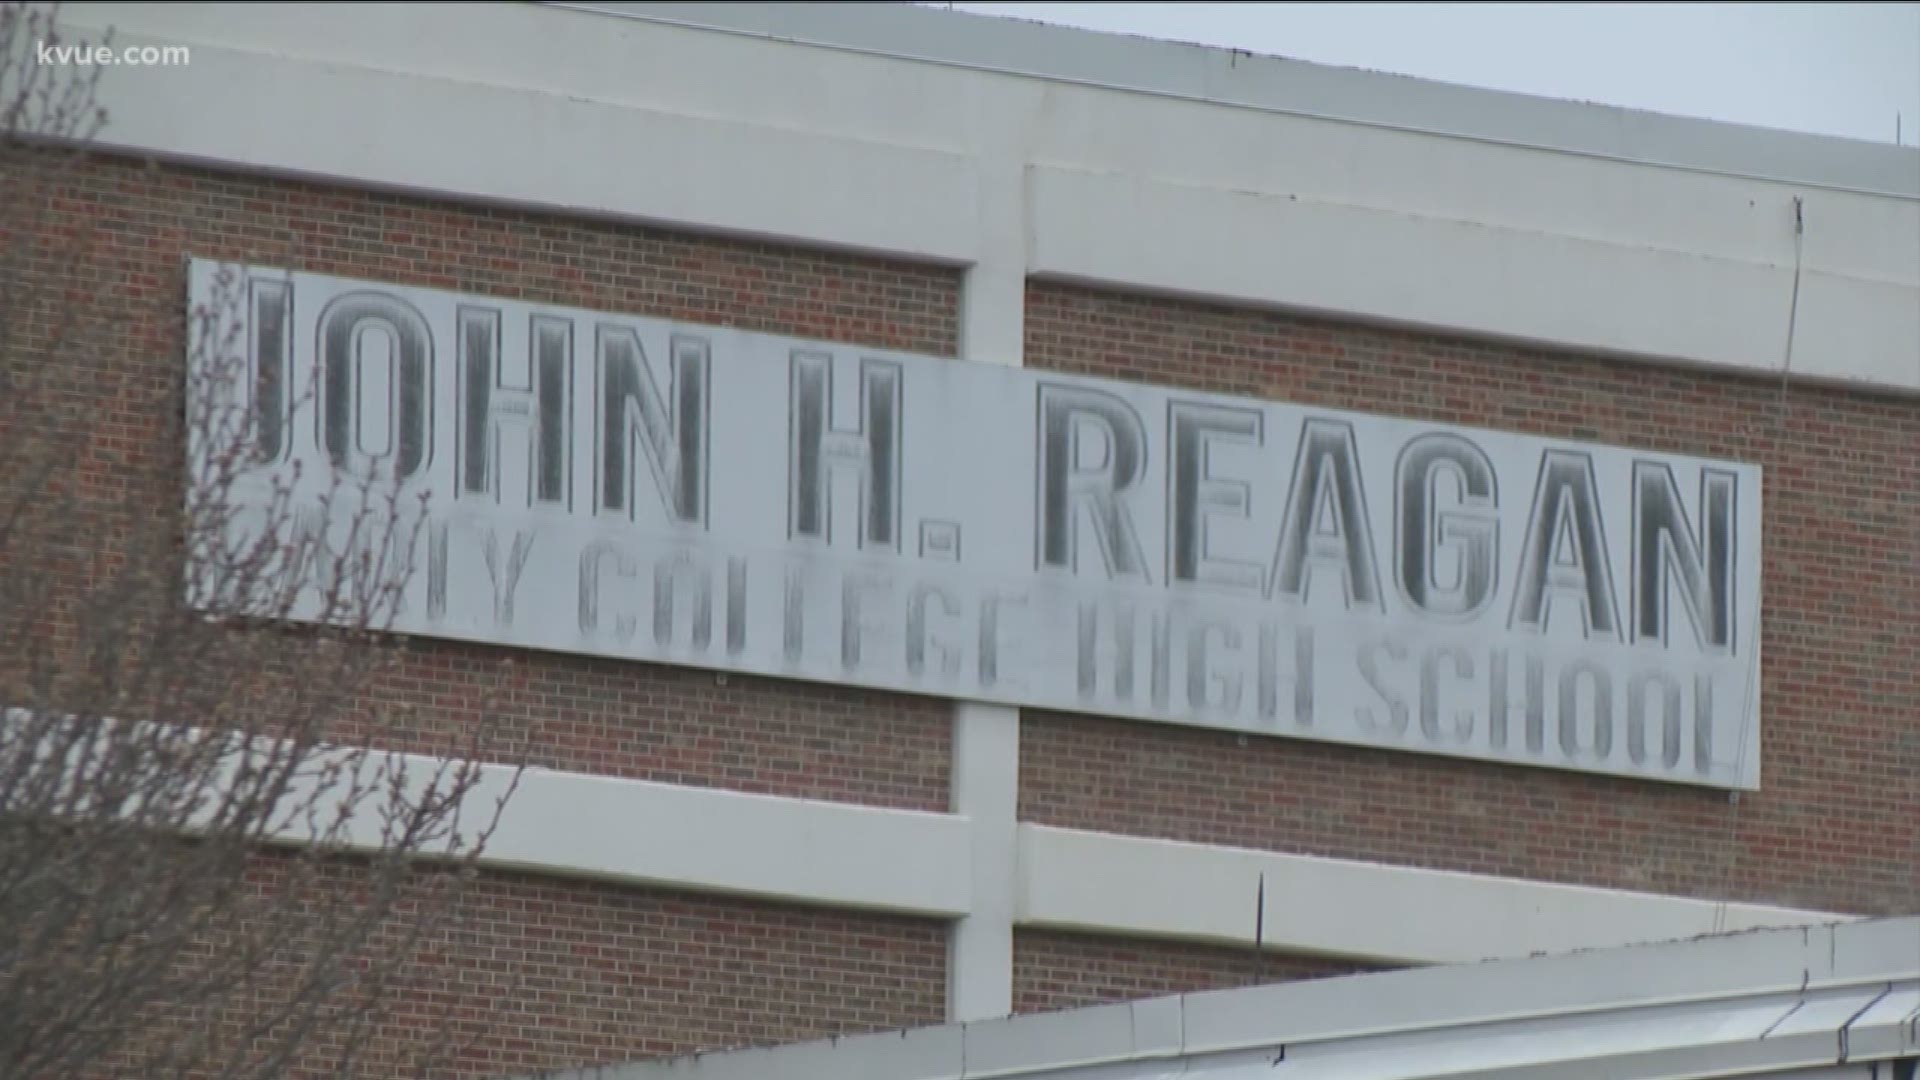 Reagan High School was named for the Postmaster General for the Confederacy during the Civil War.